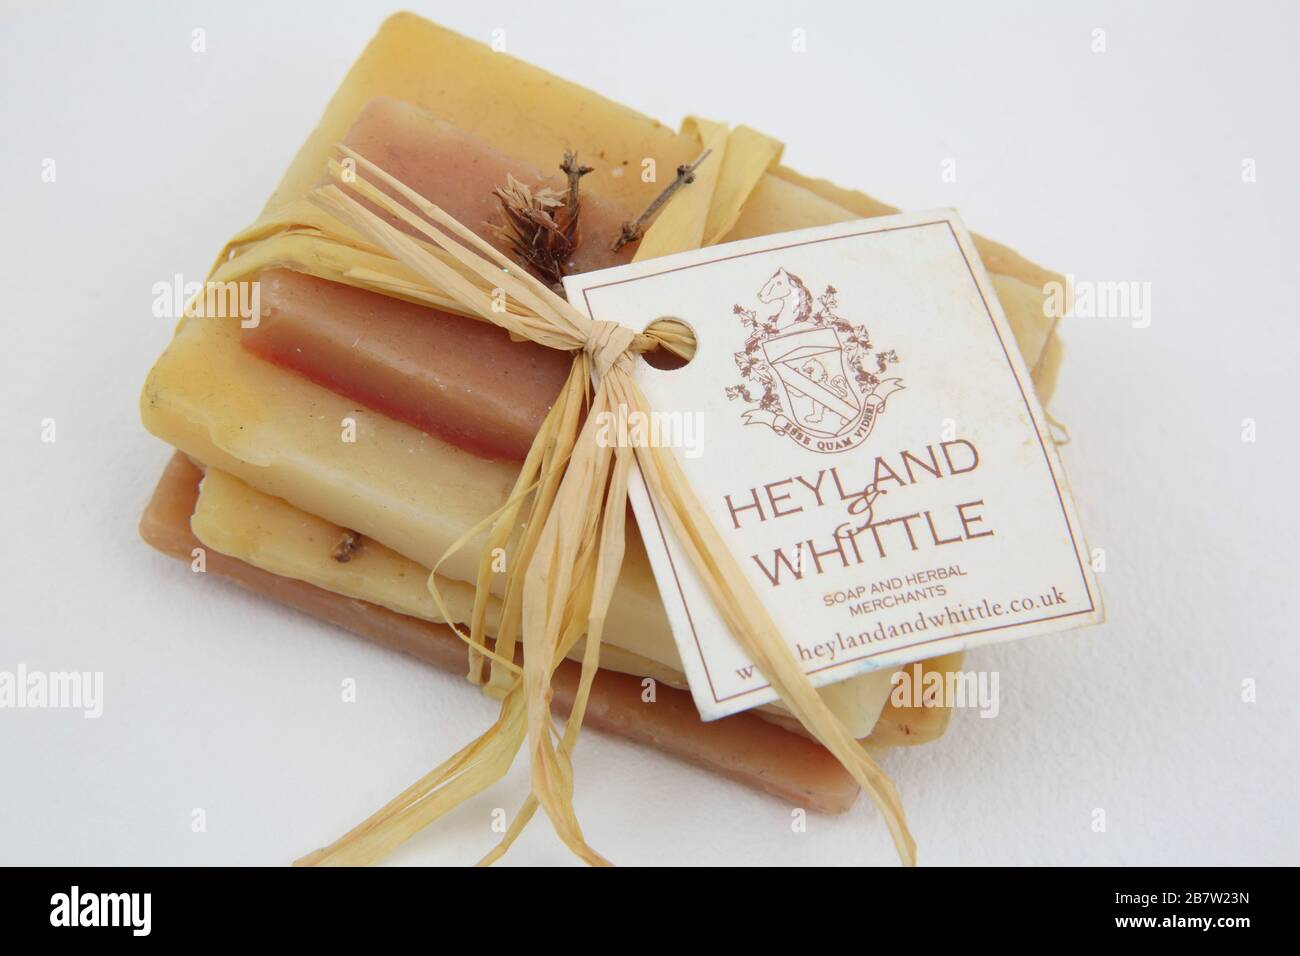 Heyland and Whittle Soap and Herbalist Merchant - Handmade Soap Stock Photo